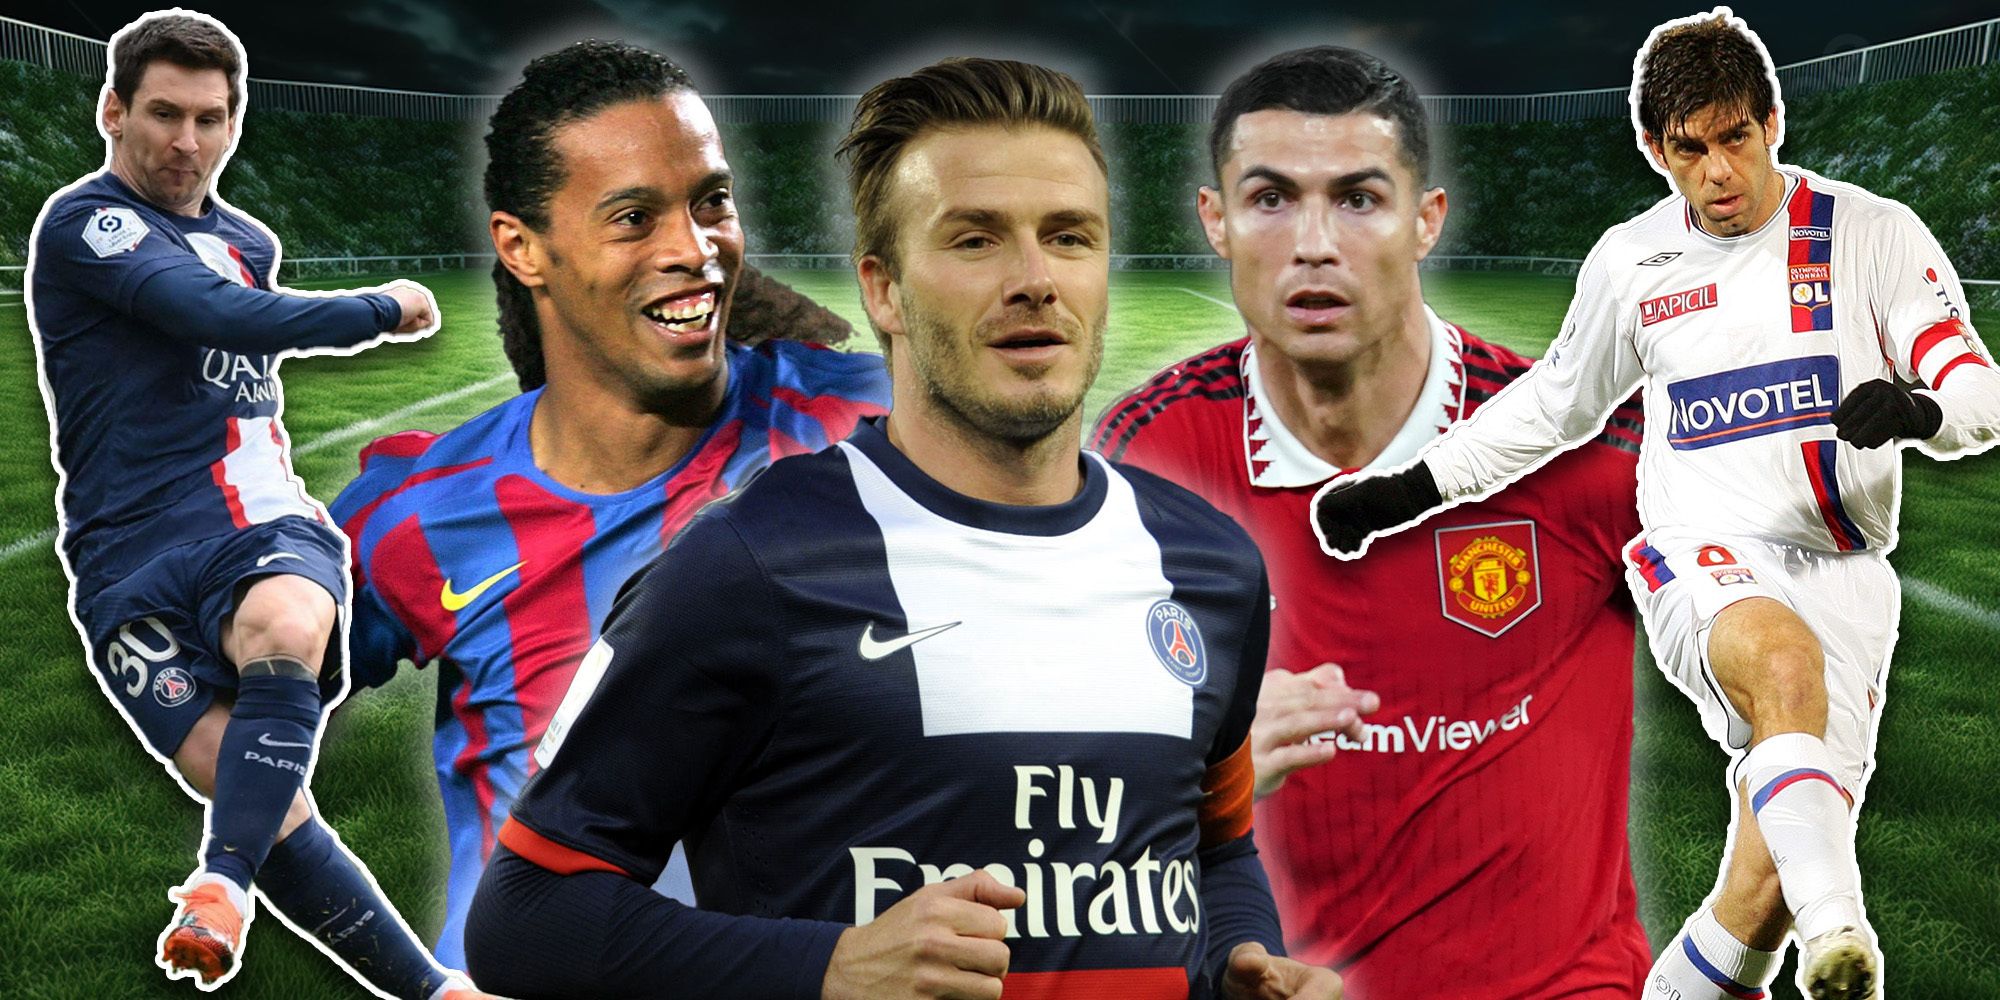 Football fans rank the 25 greatest free-kick takers ever